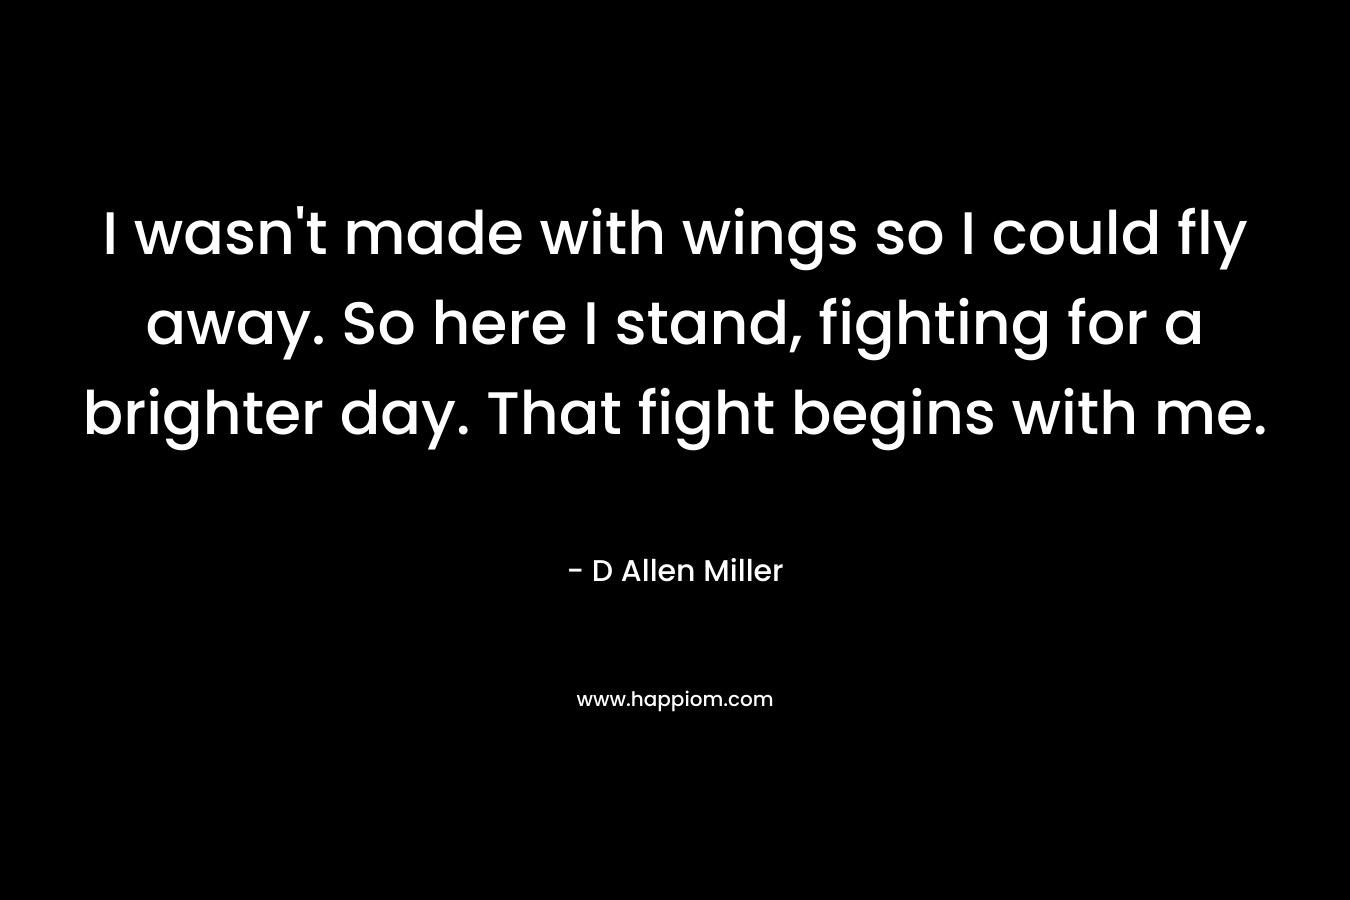 I wasn't made with wings so I could fly away. So here I stand, fighting for a brighter day. That fight begins with me.